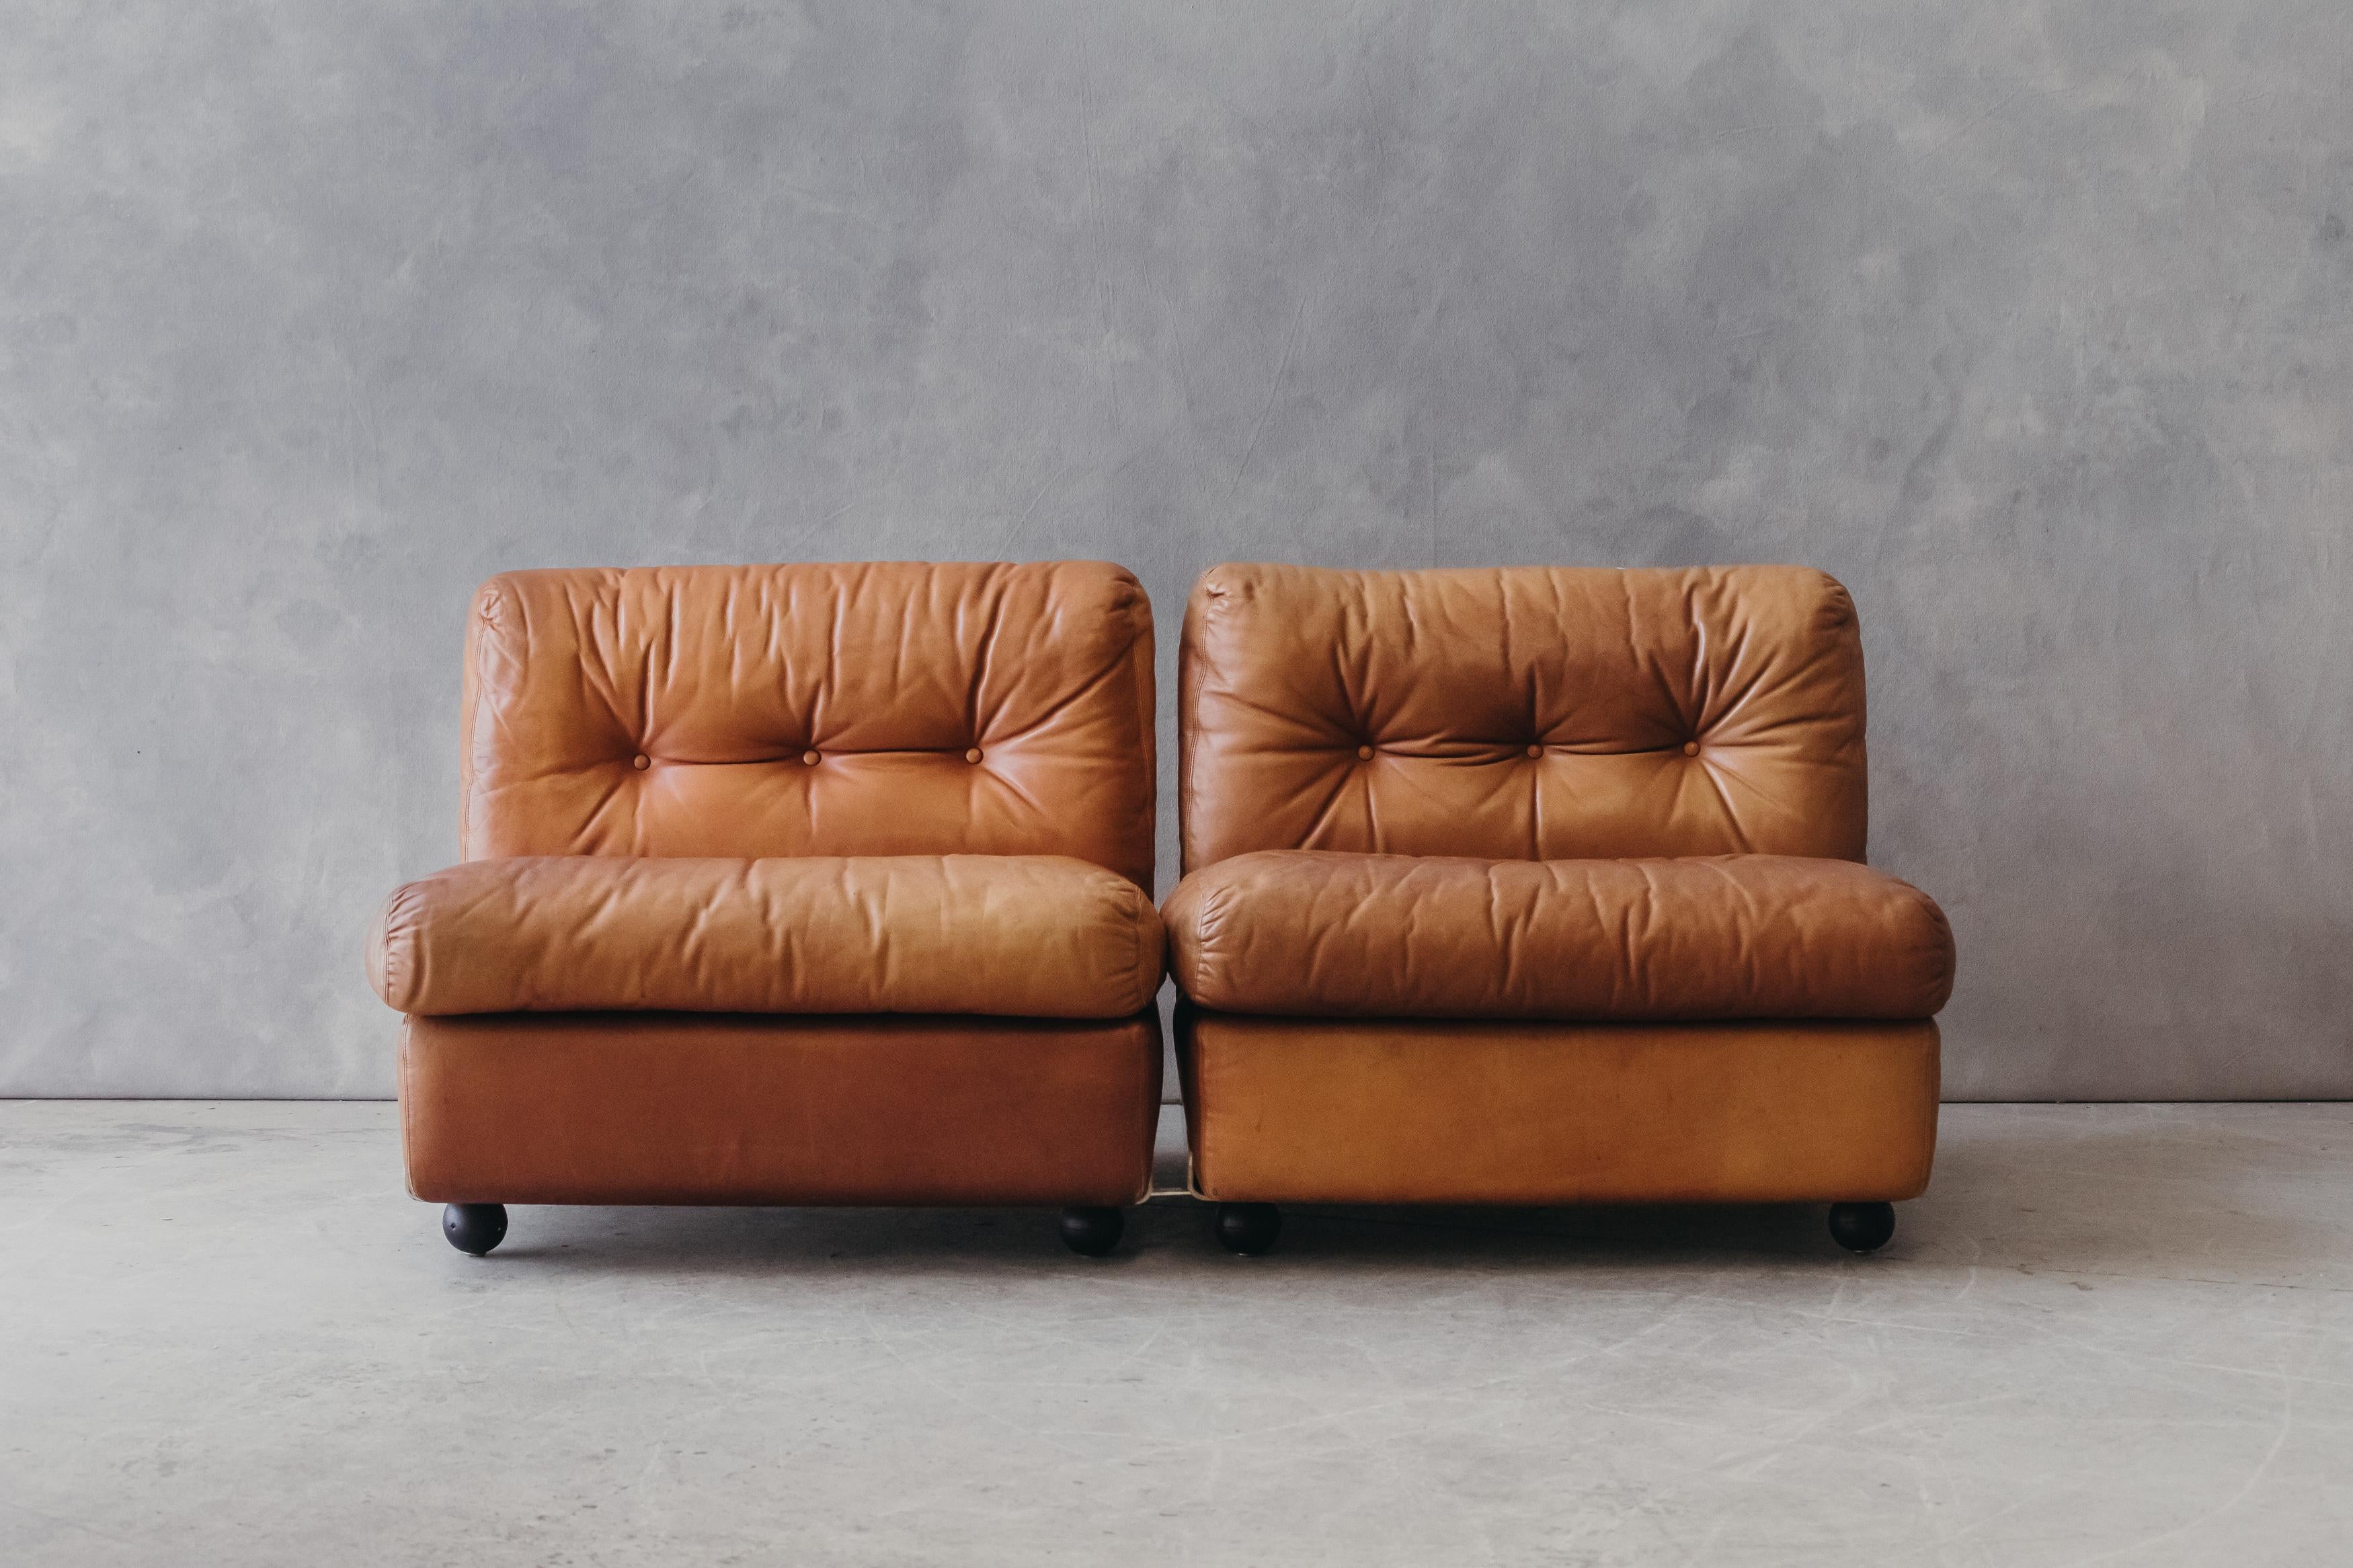 Vintage pair of leather lounge chairs by Mario Bellini, Italy, circa 1970. Original cognac leather with great patina. Model 